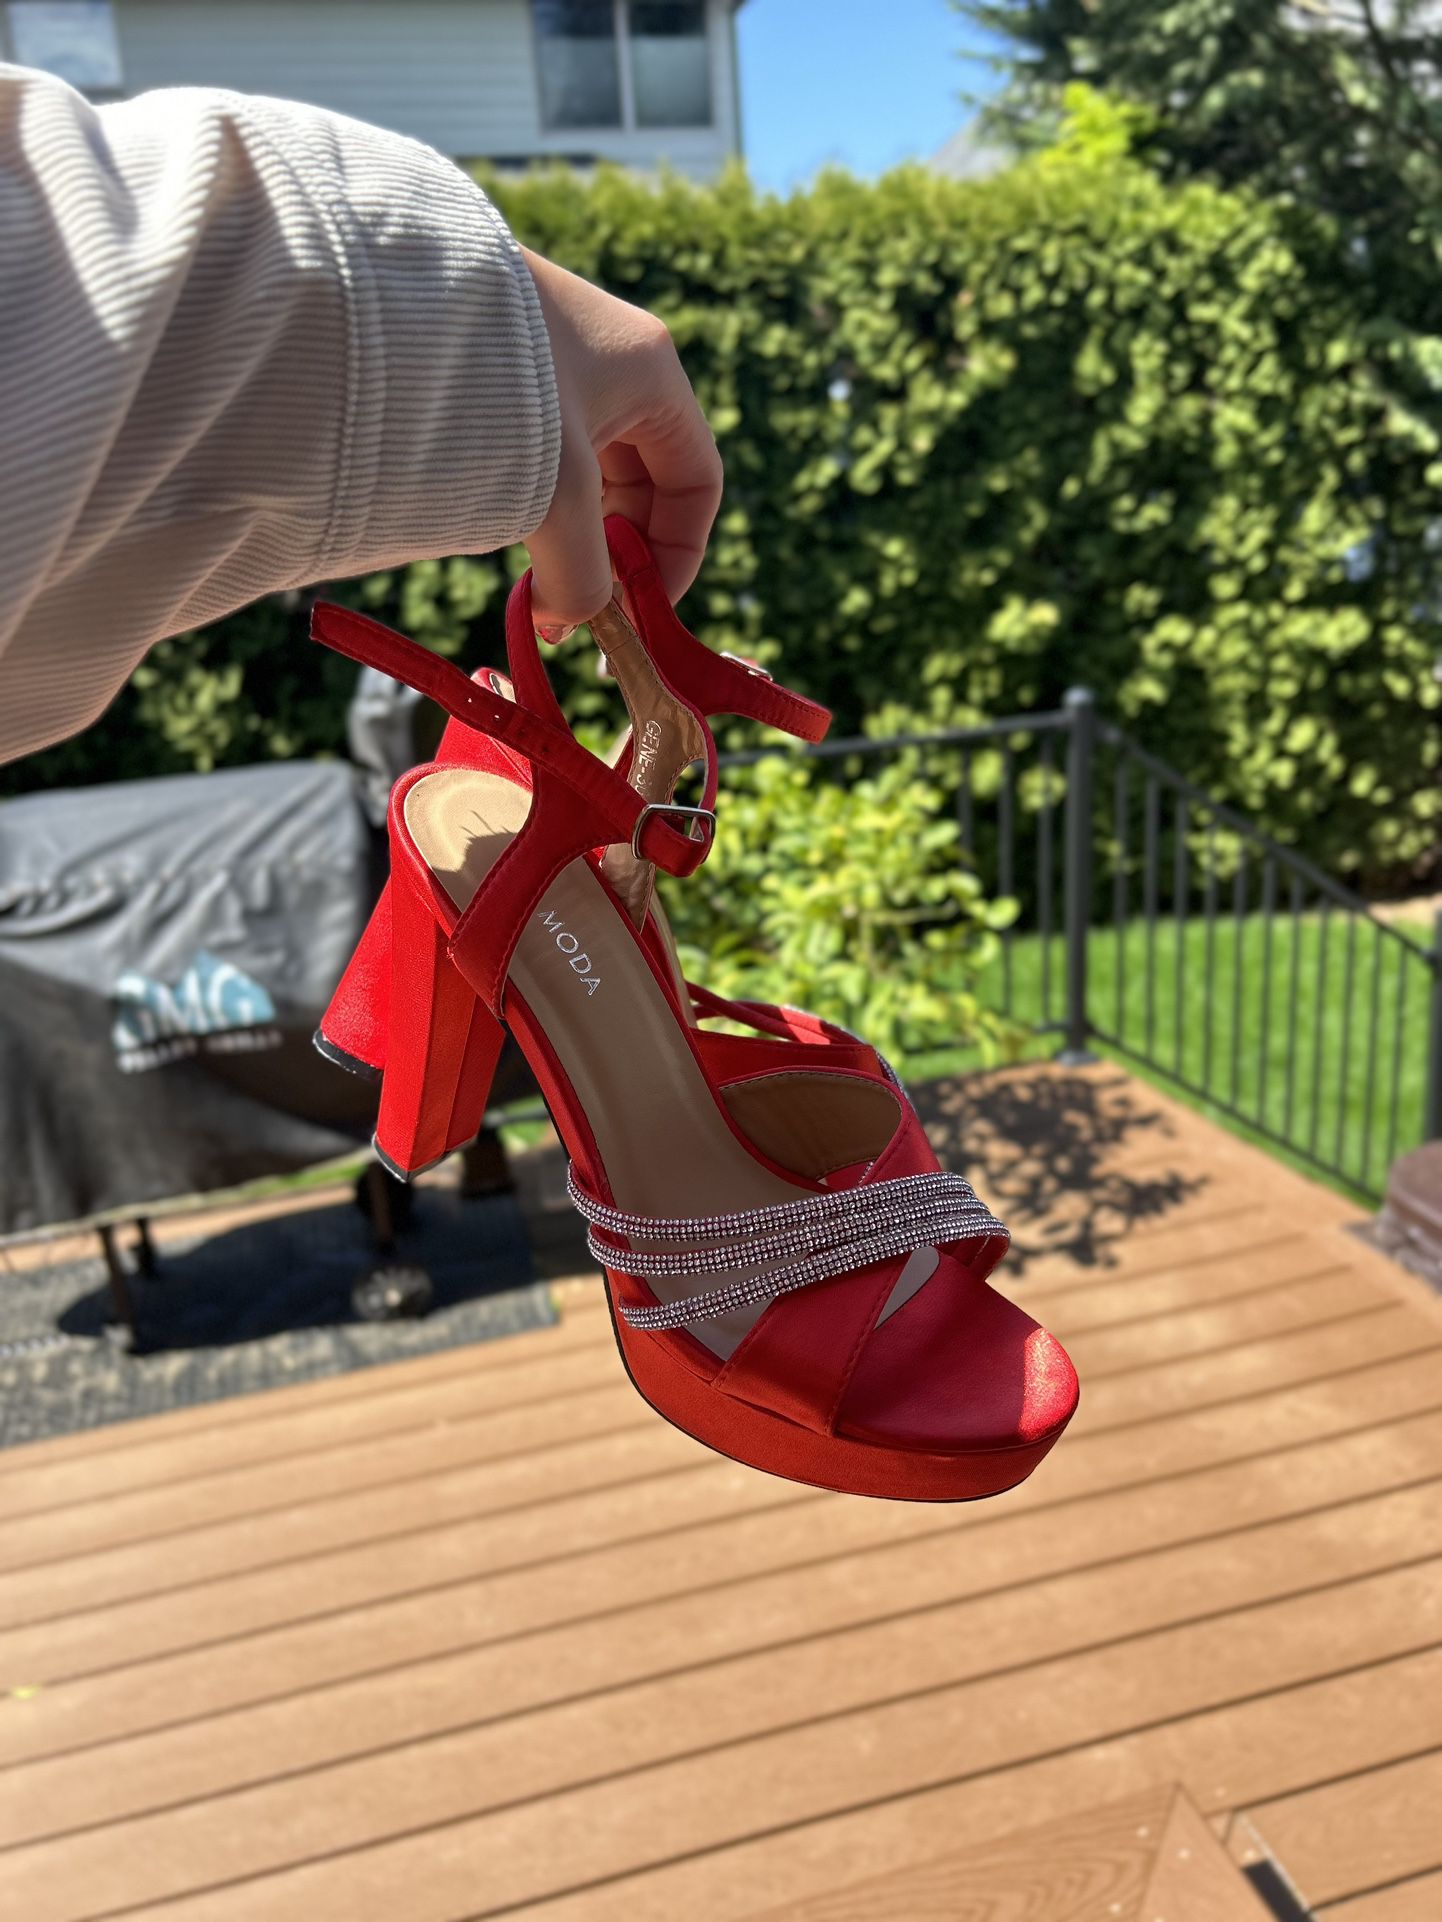 Woman’s Brand New Red Bling High Heels 